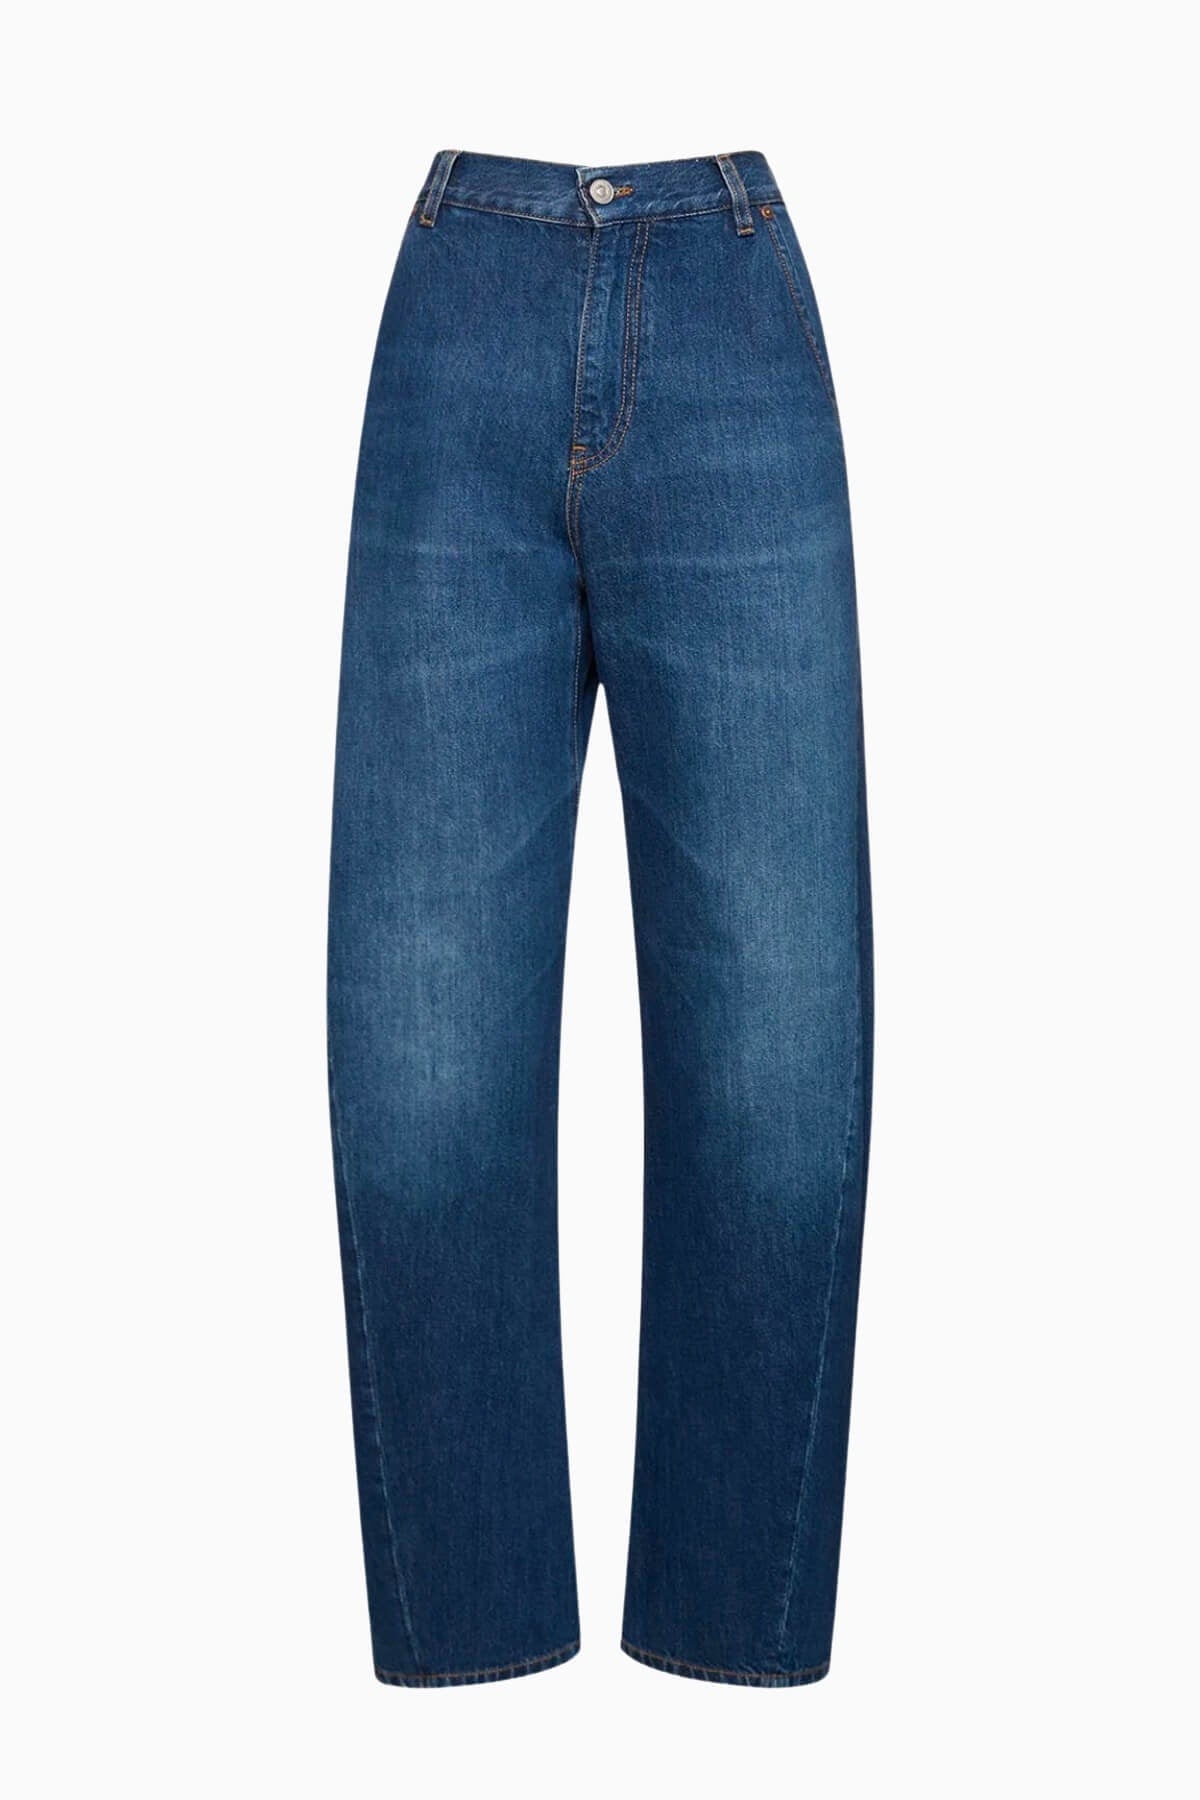 Victoria Beckham Twisted Low Rise Slouch Jean - Vintage Wash